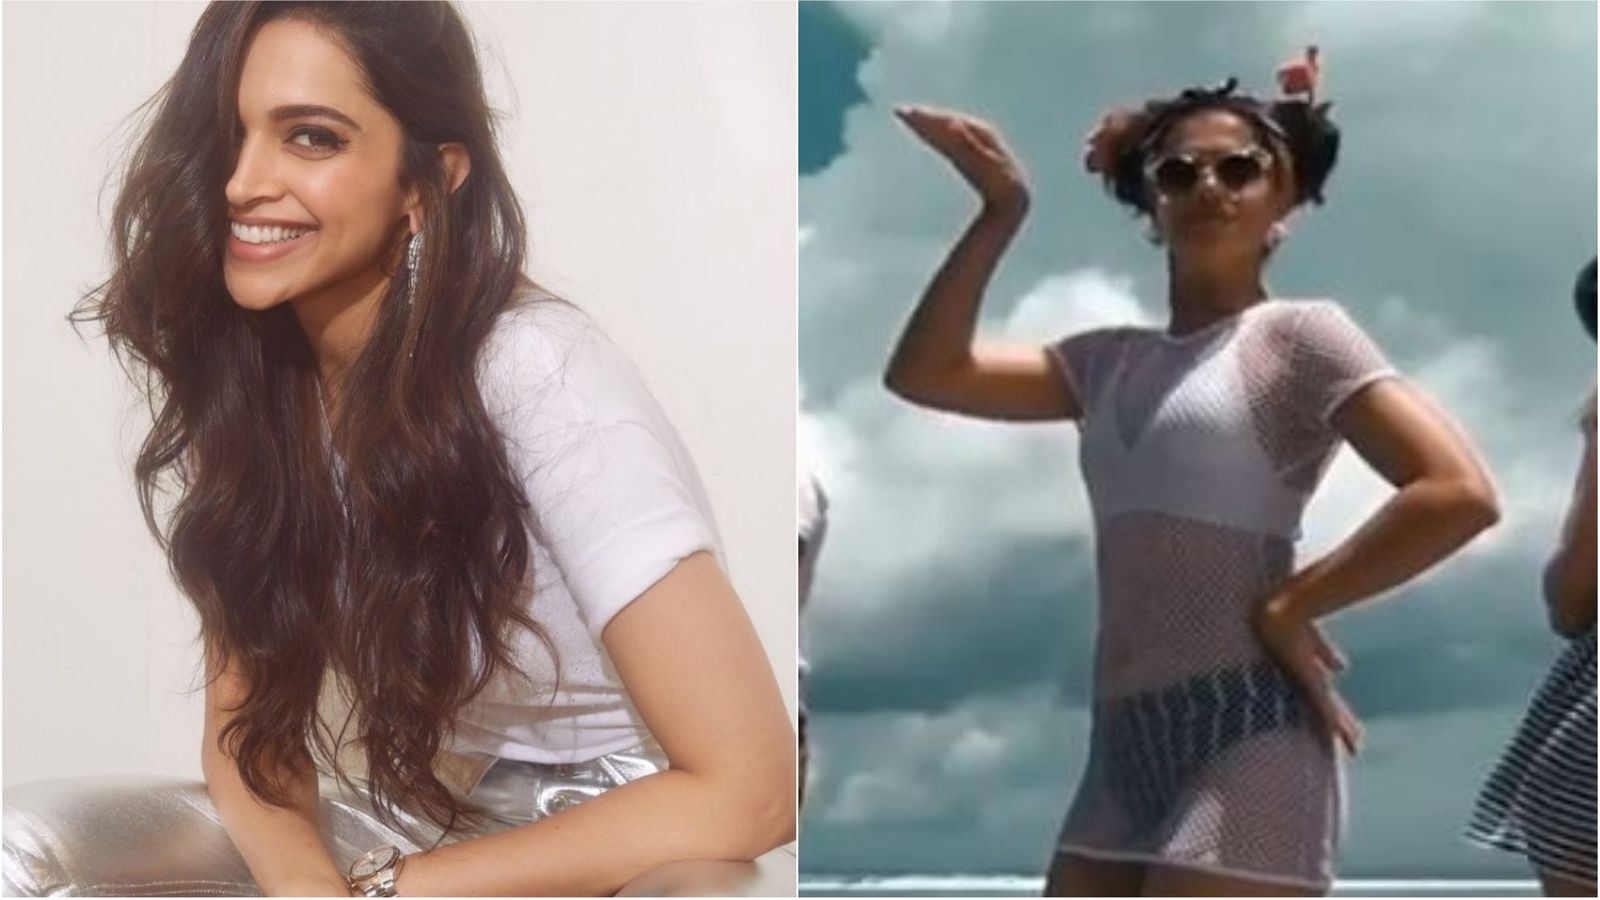 Deepika Padukone Lists Taapsee Pannu's Biggini Shoot Video As Her Favorite Performance Of The Year, Says She's A Huge Fan